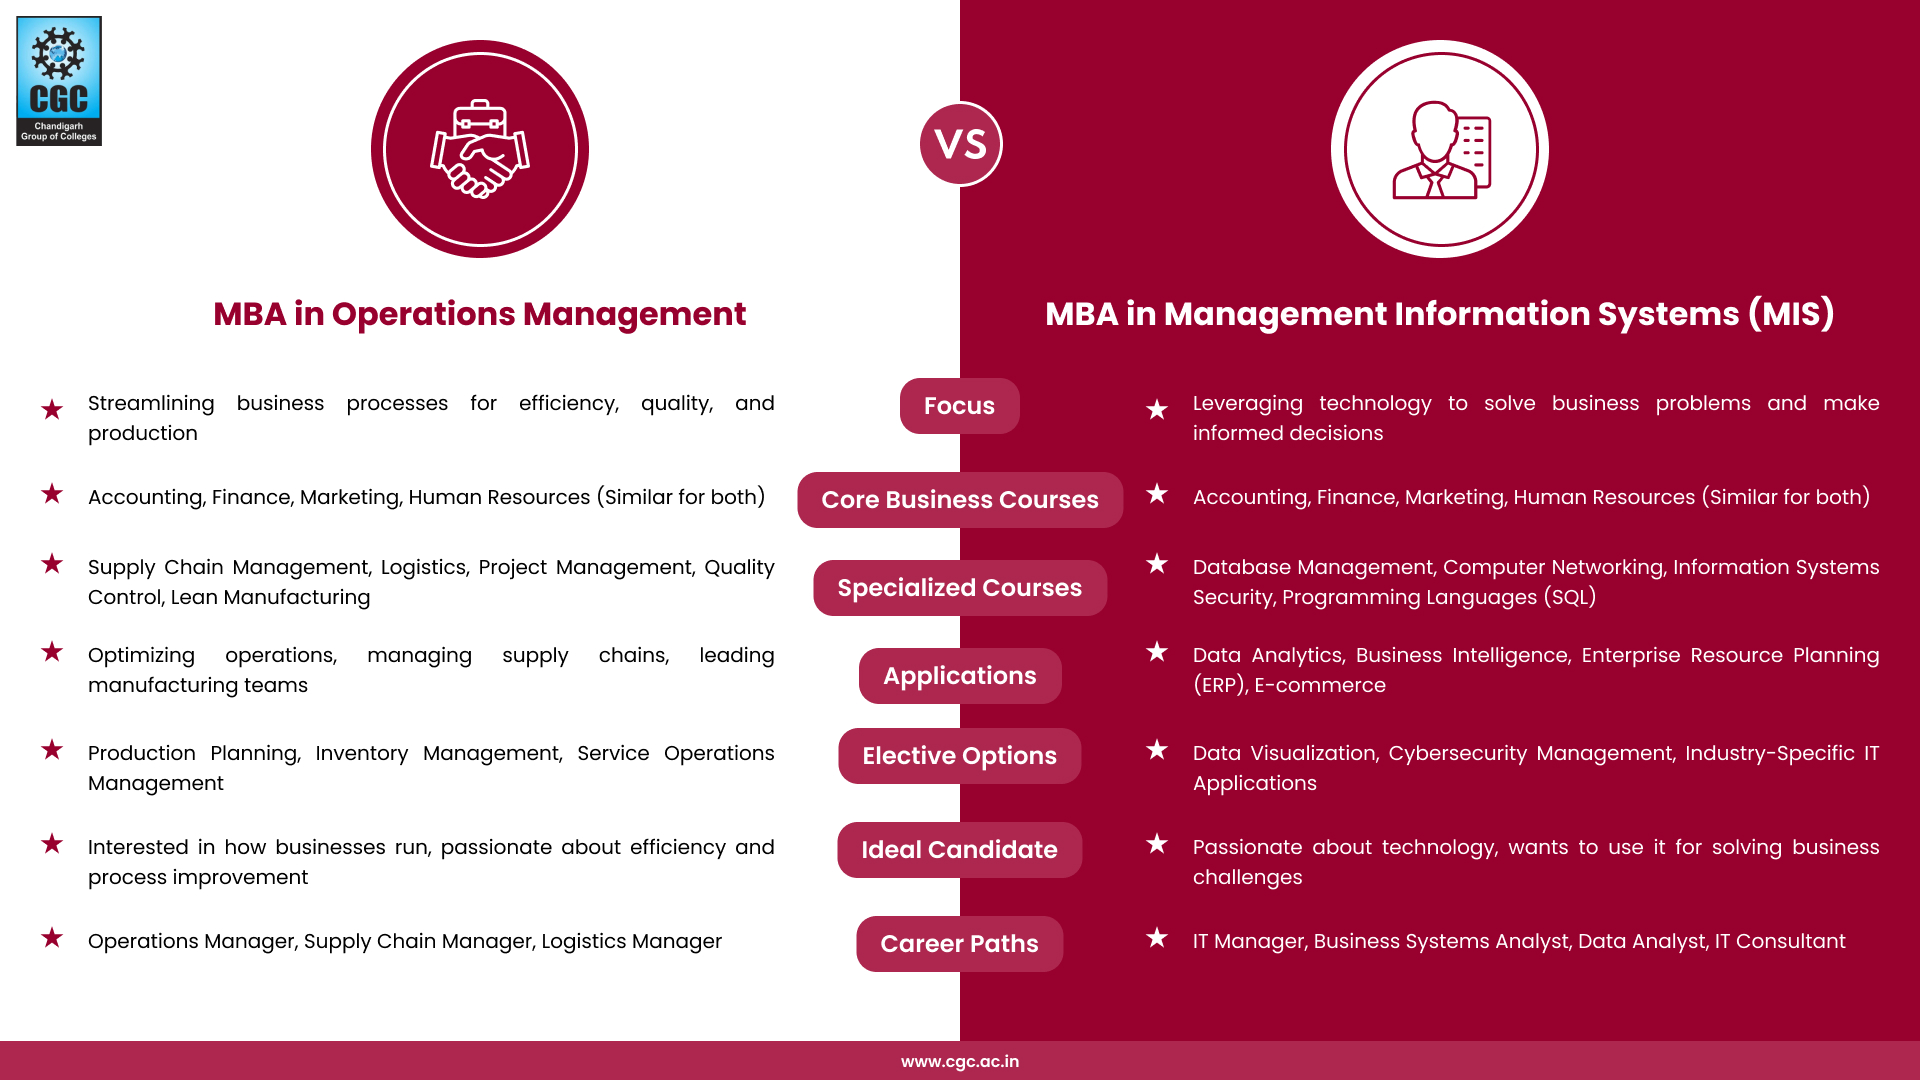 Difference Between MBA in Operations Management vs MBA in Management Information Systems